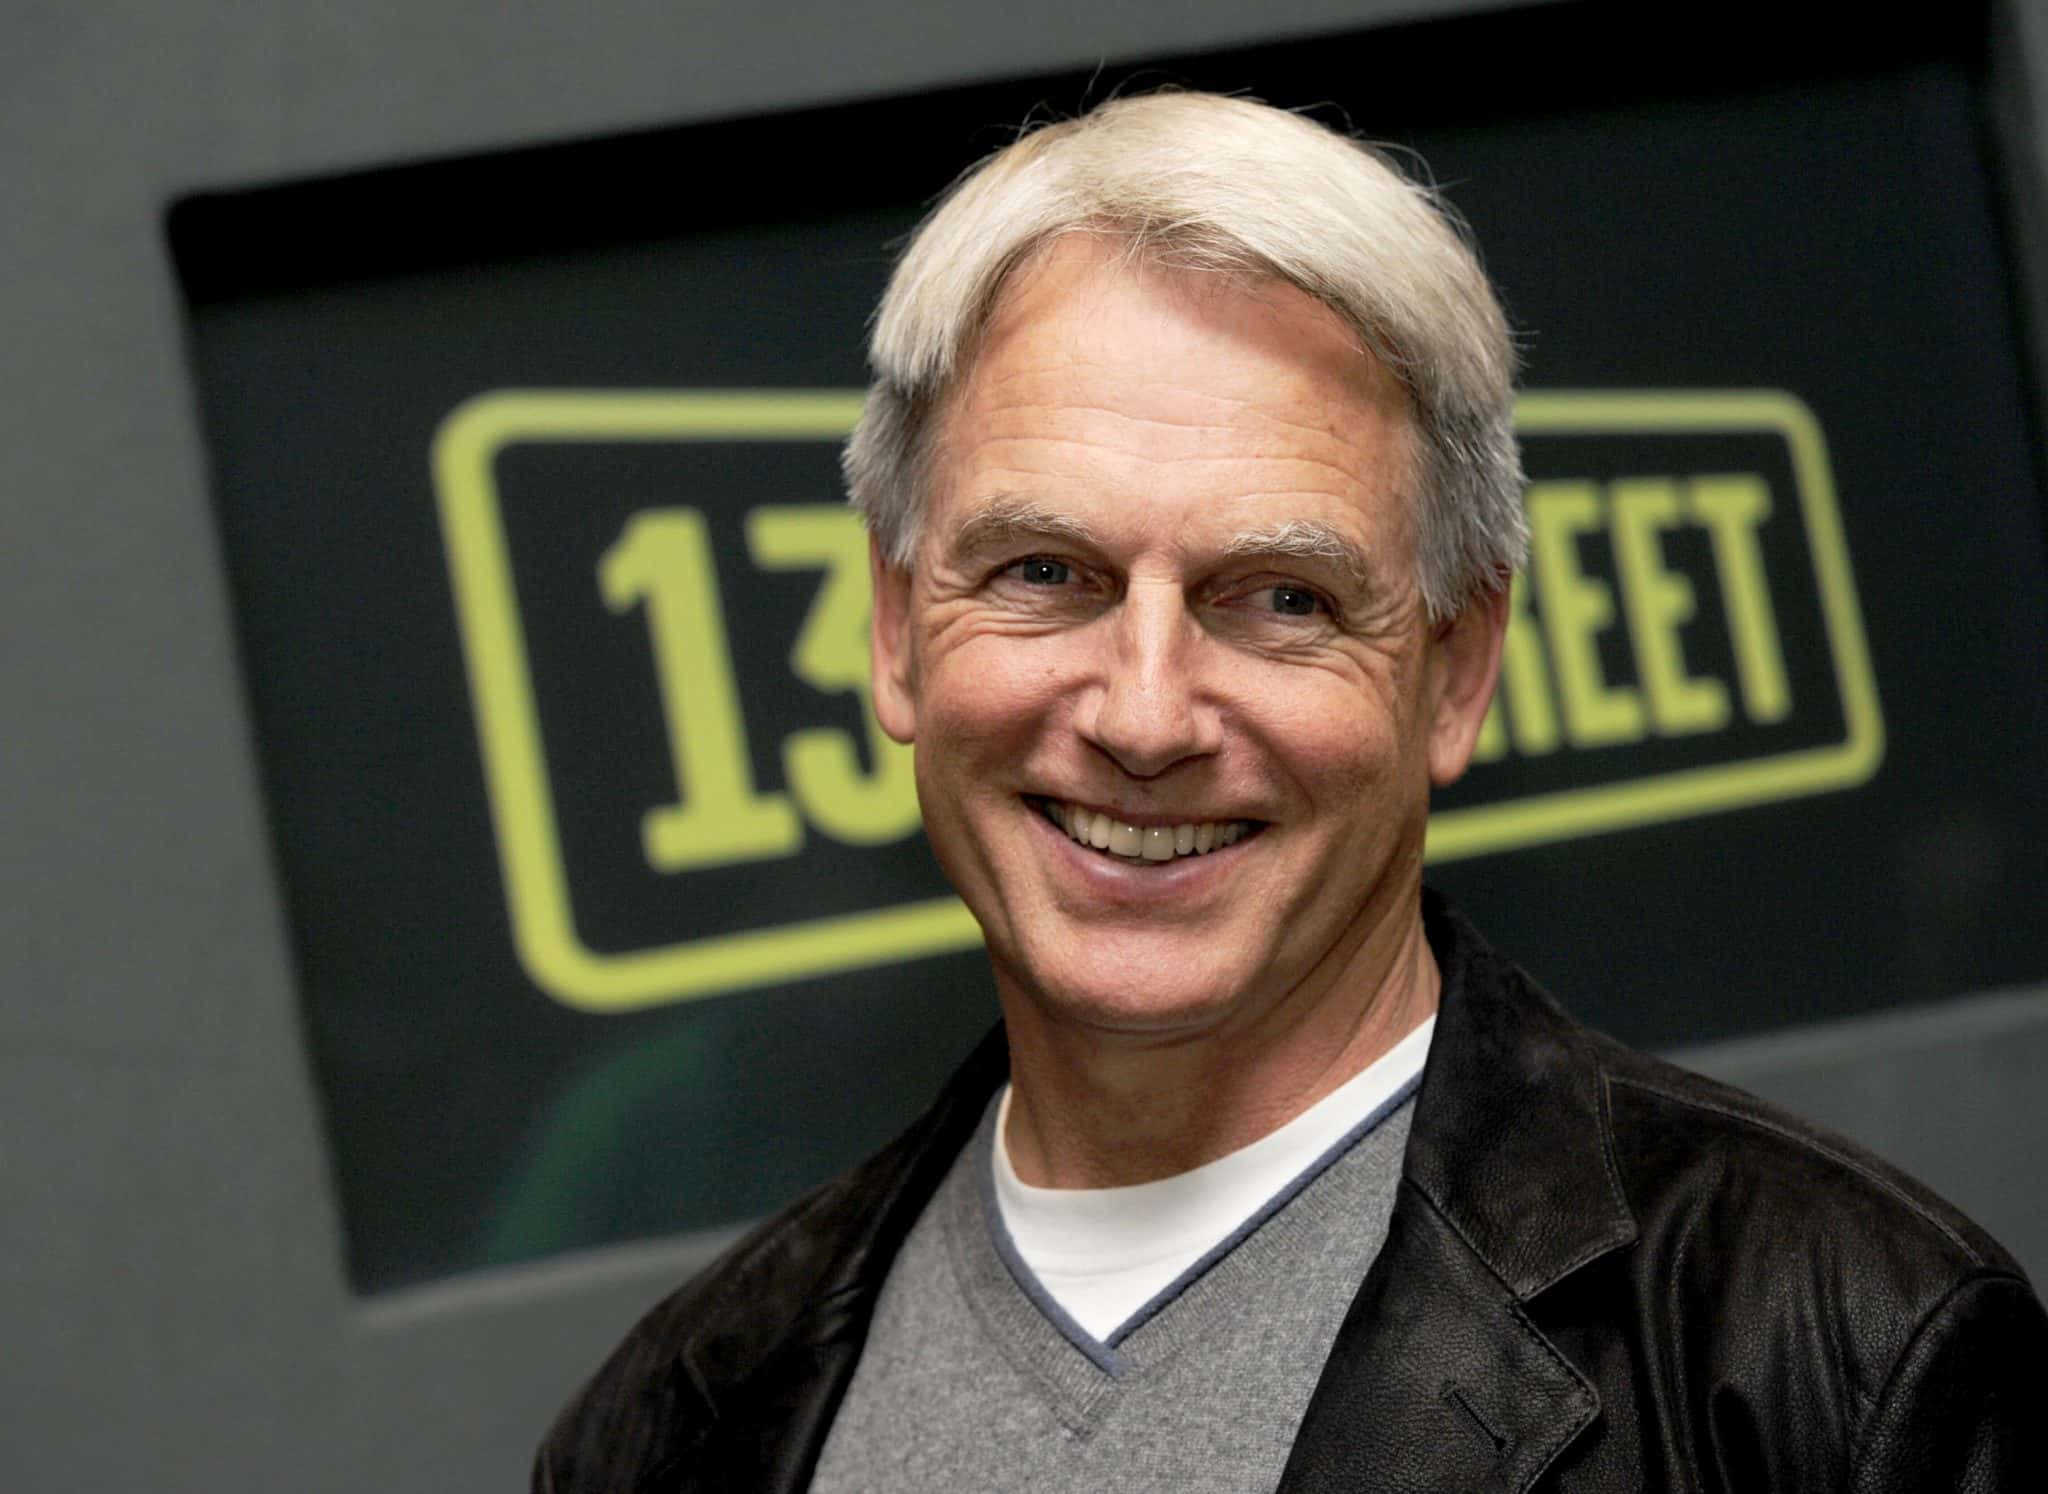 pam-dawber-and-mark-harmon-reveal-the-secret-to-making-their-31-year